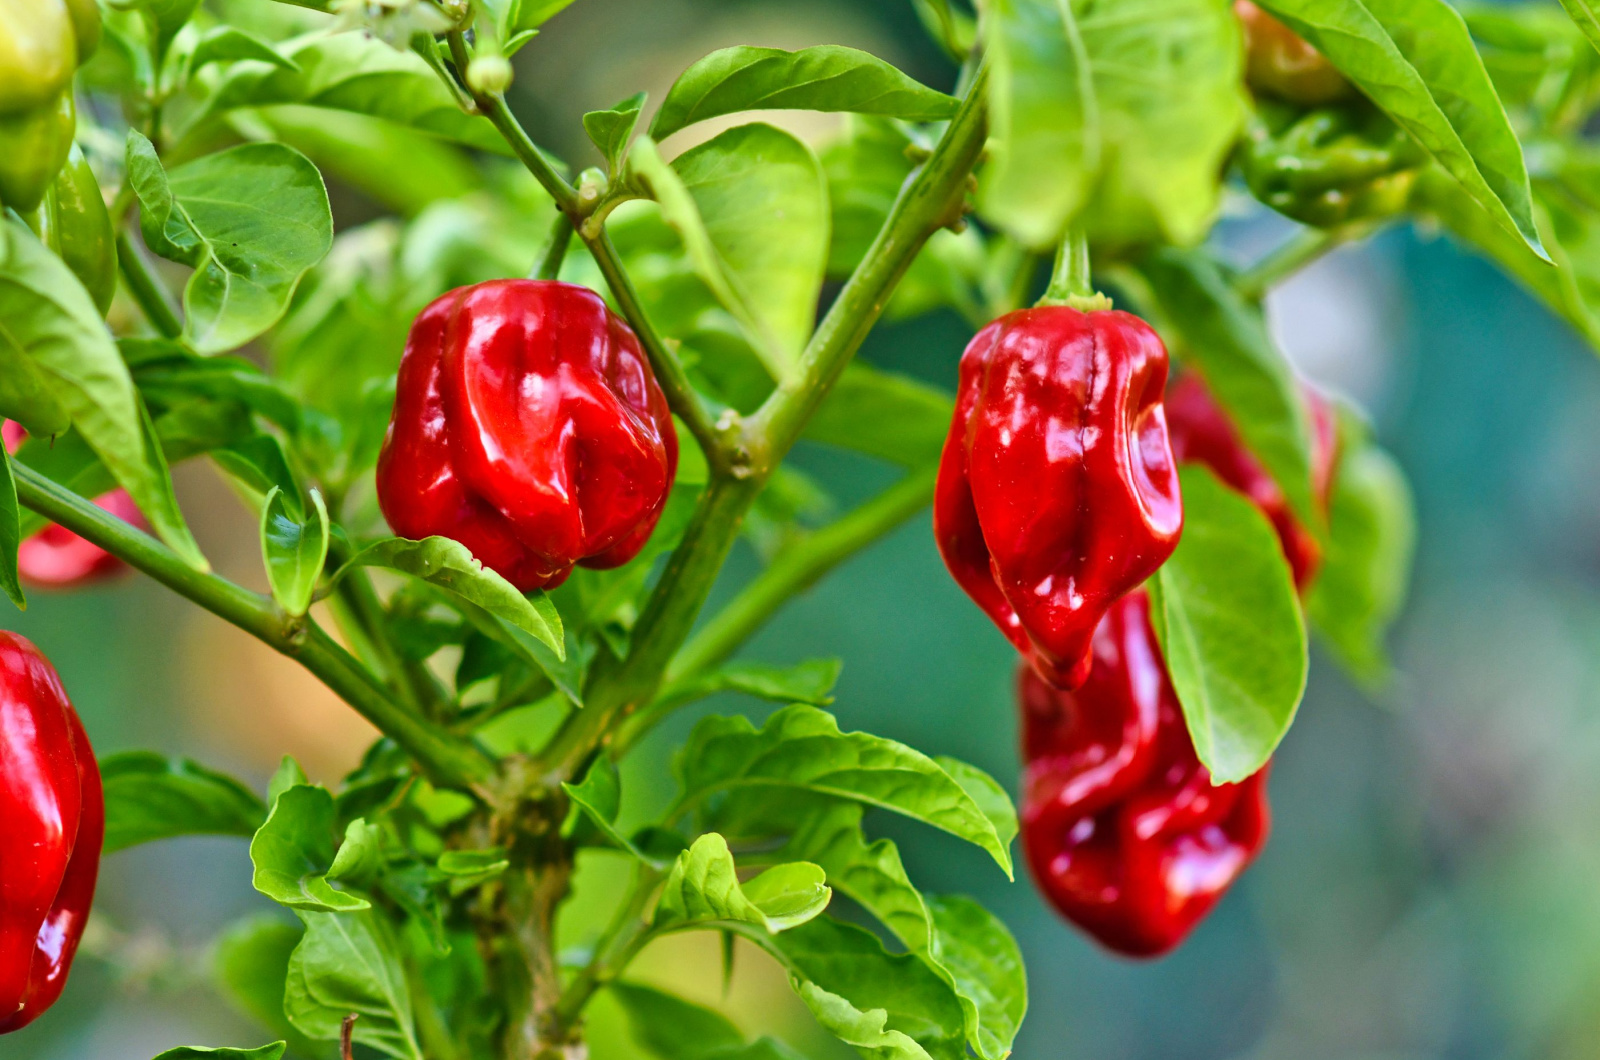 Habaneros chili pepper plant with red ripe fruits